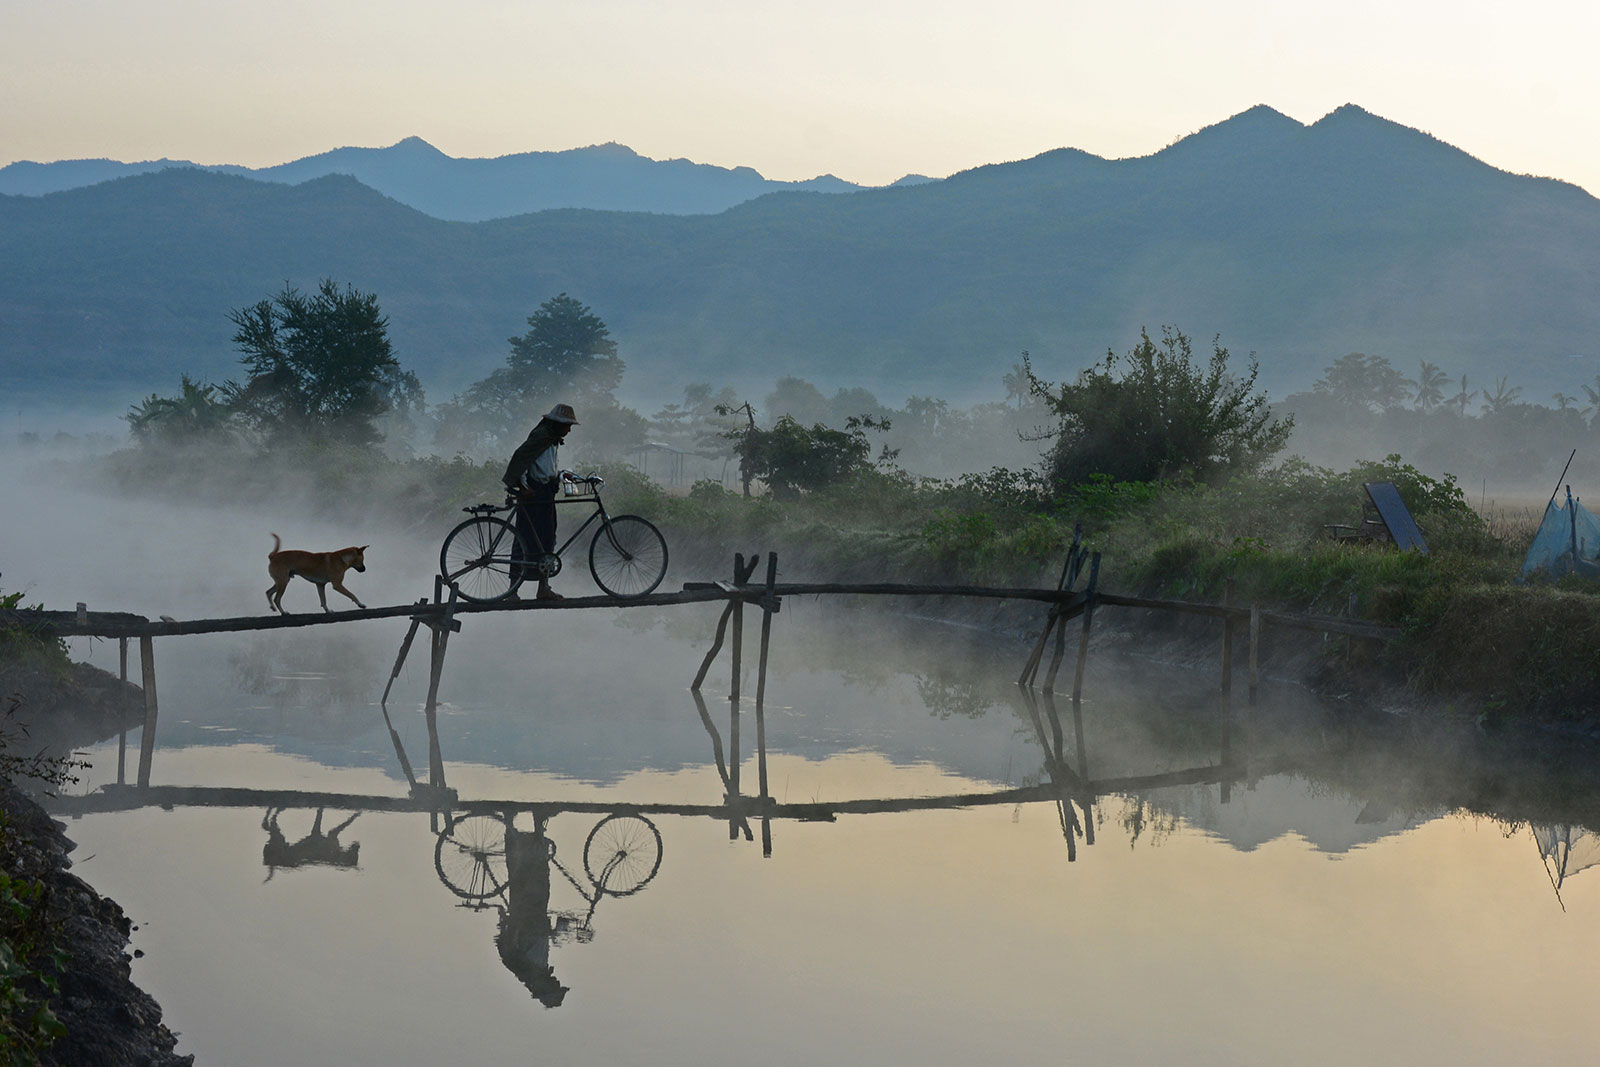 Title: Foggy morning | Author: Myo Min Kywe | Filter used: ND | Country: Myanmar